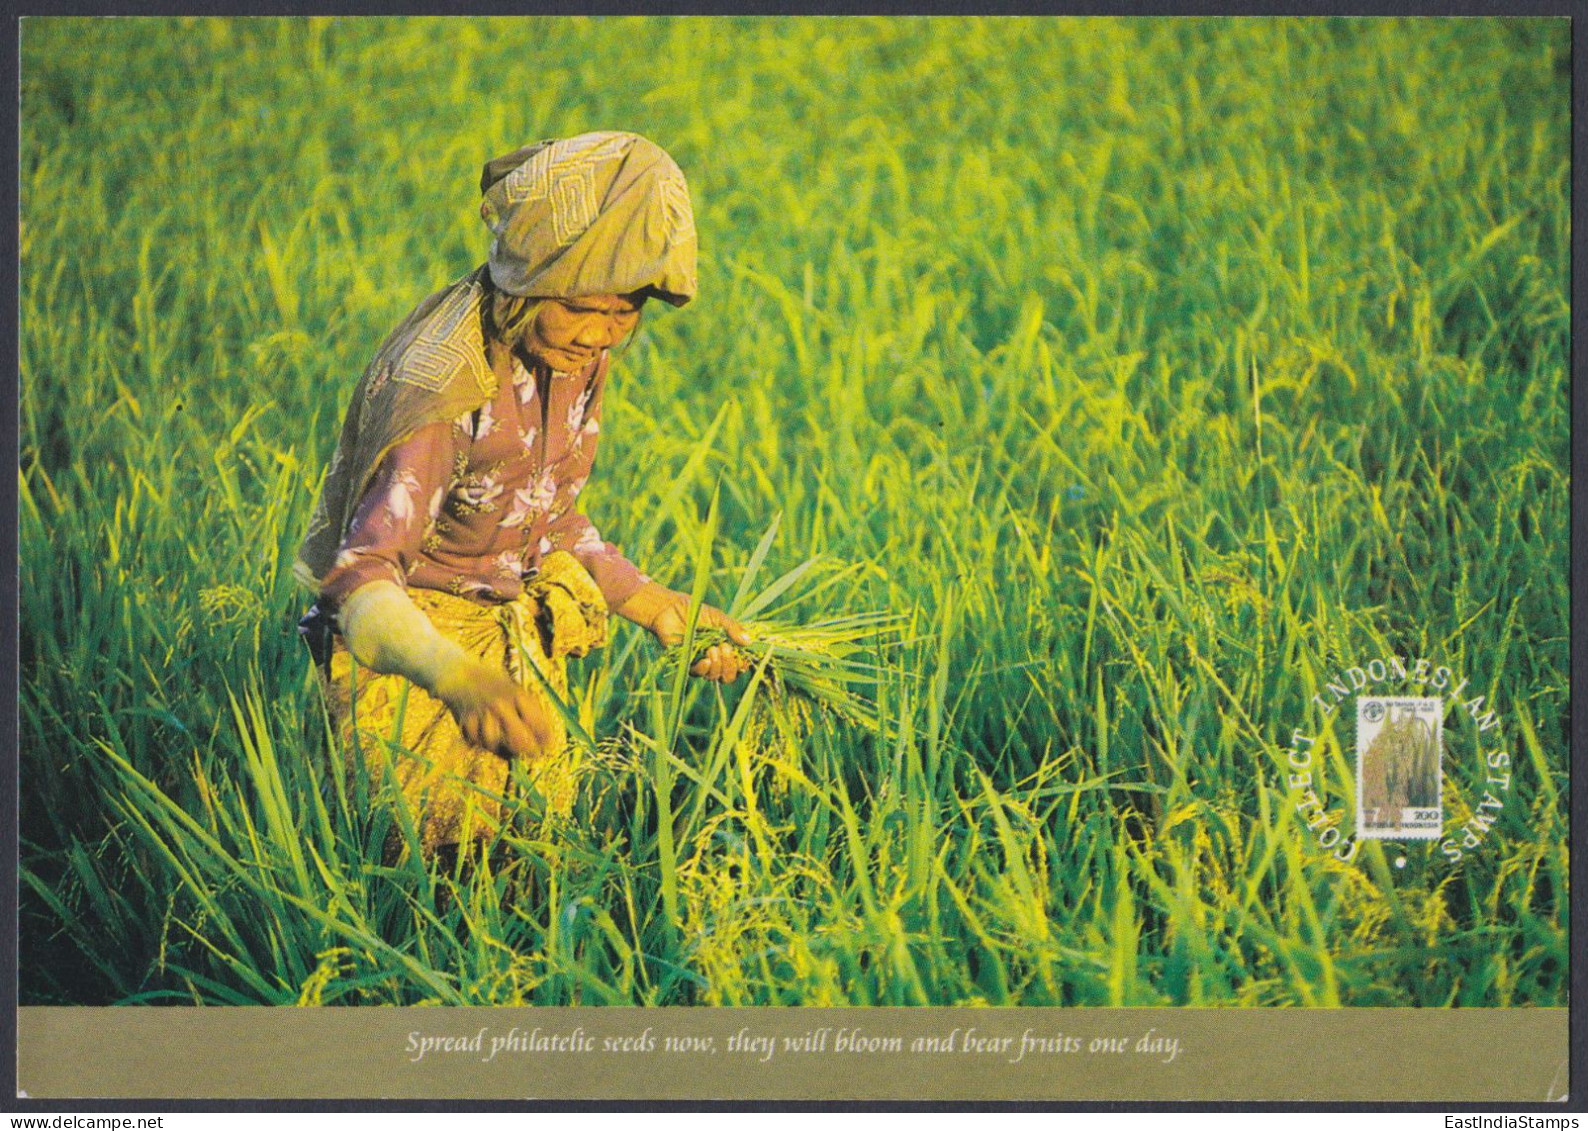 Indonesia 2000 Mint Postcard Paddy Picking Sumedang, West Java, Rice, Farming, Farm, Agriculture, Farmer, Woman - Indonesië